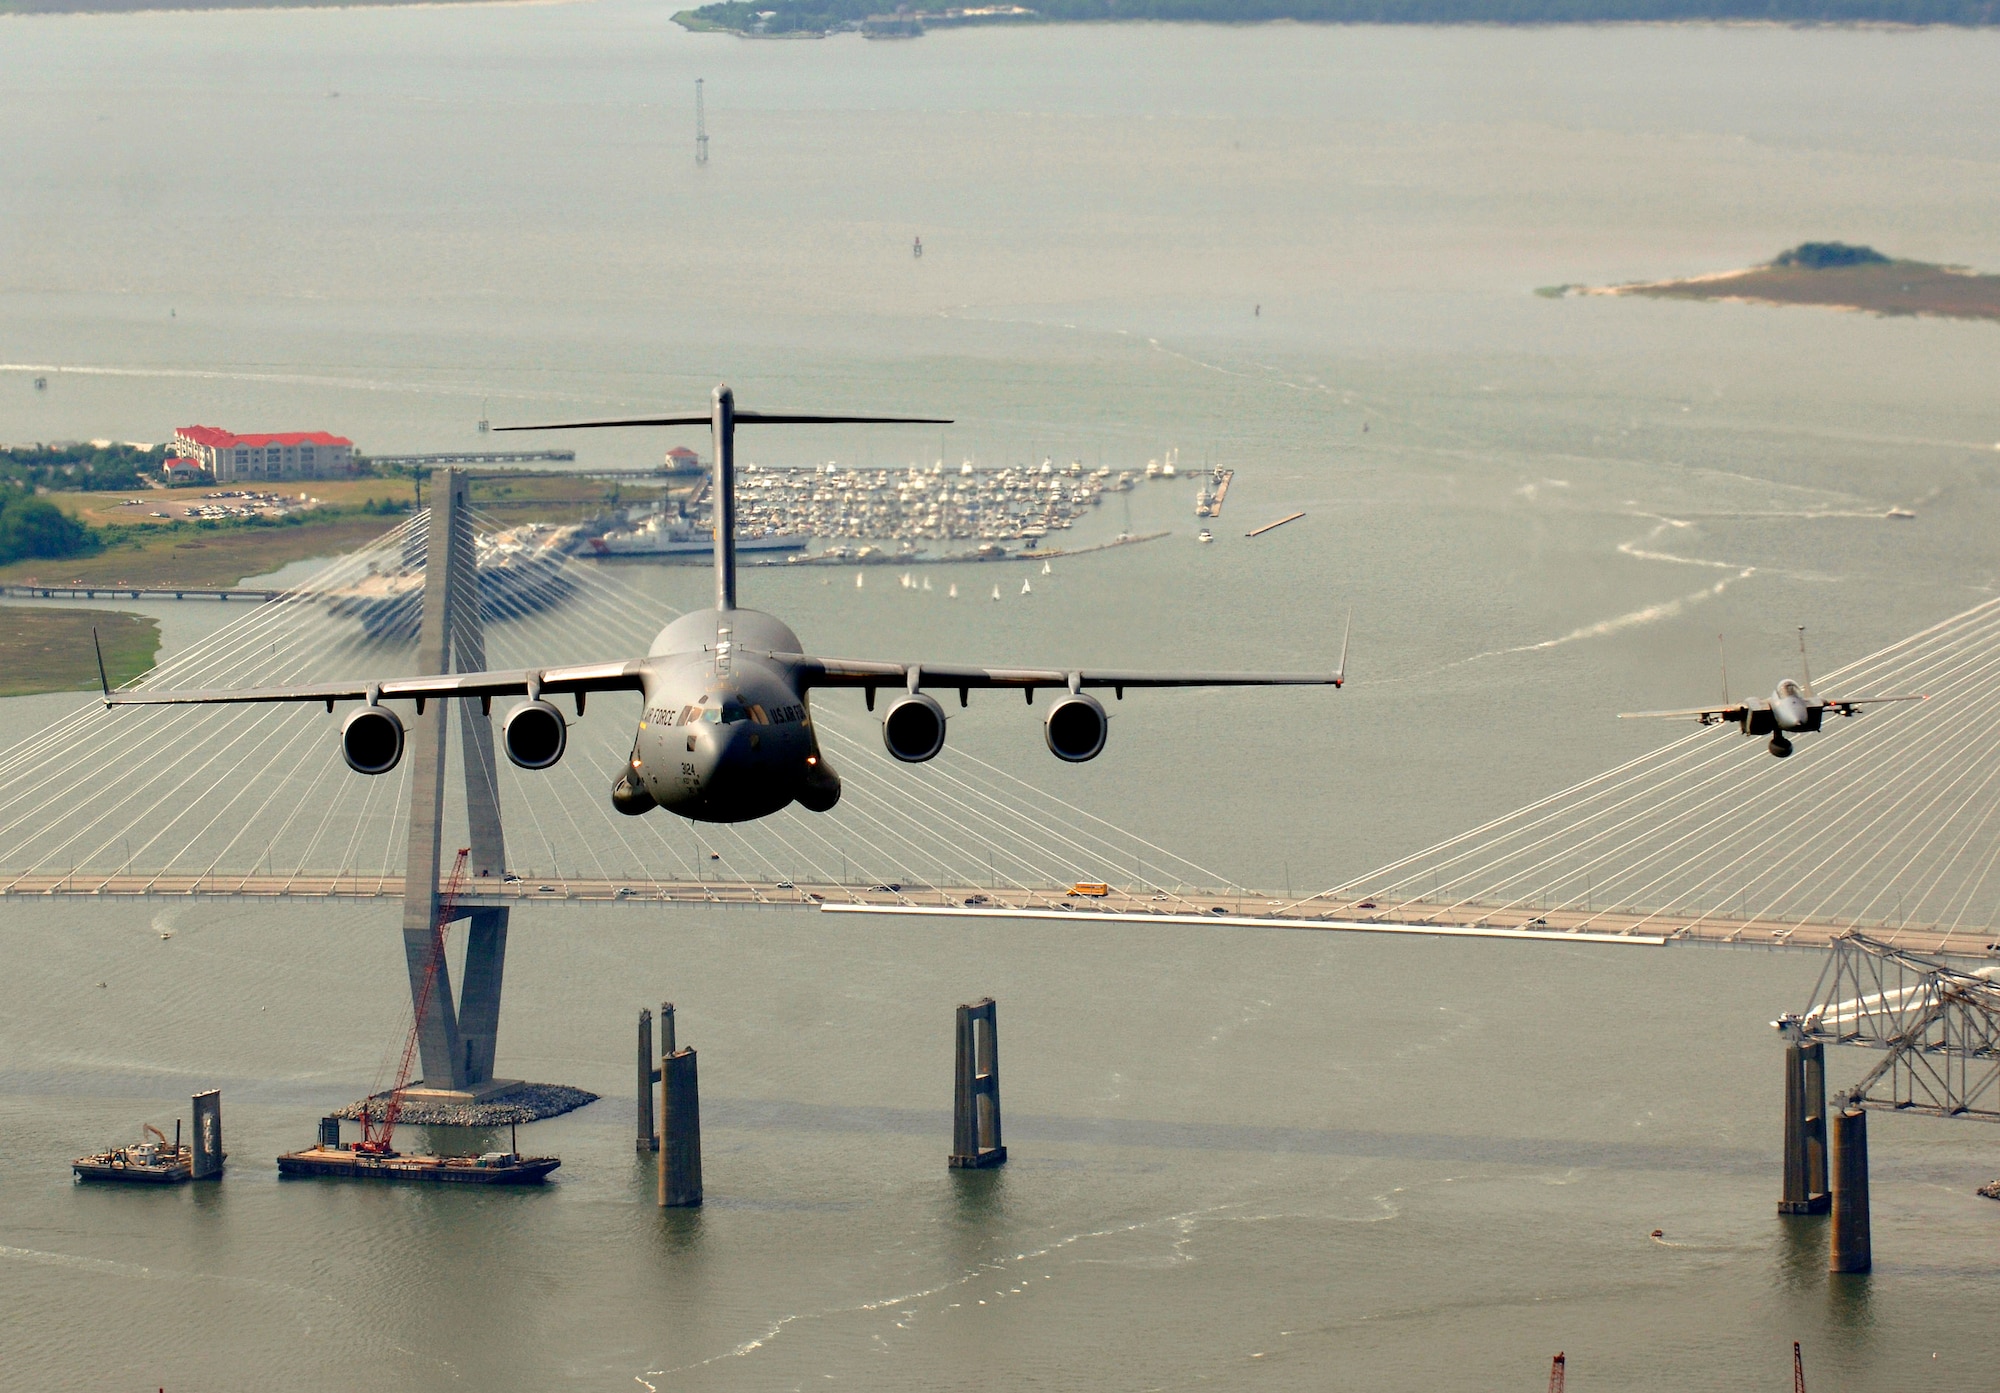 An F-15 Eagle from the 60th Fighter Squadron, Eglin Air Force Base , Fla., escorts a C-17 Globemaster III from the 14th Airlift Squadron, Charleston AFB, S.C., as they fly over the USS Yorktown and the Arthur J. Ravenel Jr. Bridge in the Charleston, S.C., area during a local training mission on Tuesday, May 16, 2006. (U.S. Air Force photo/Tech. Sgt. Russell E. Cooley IV)